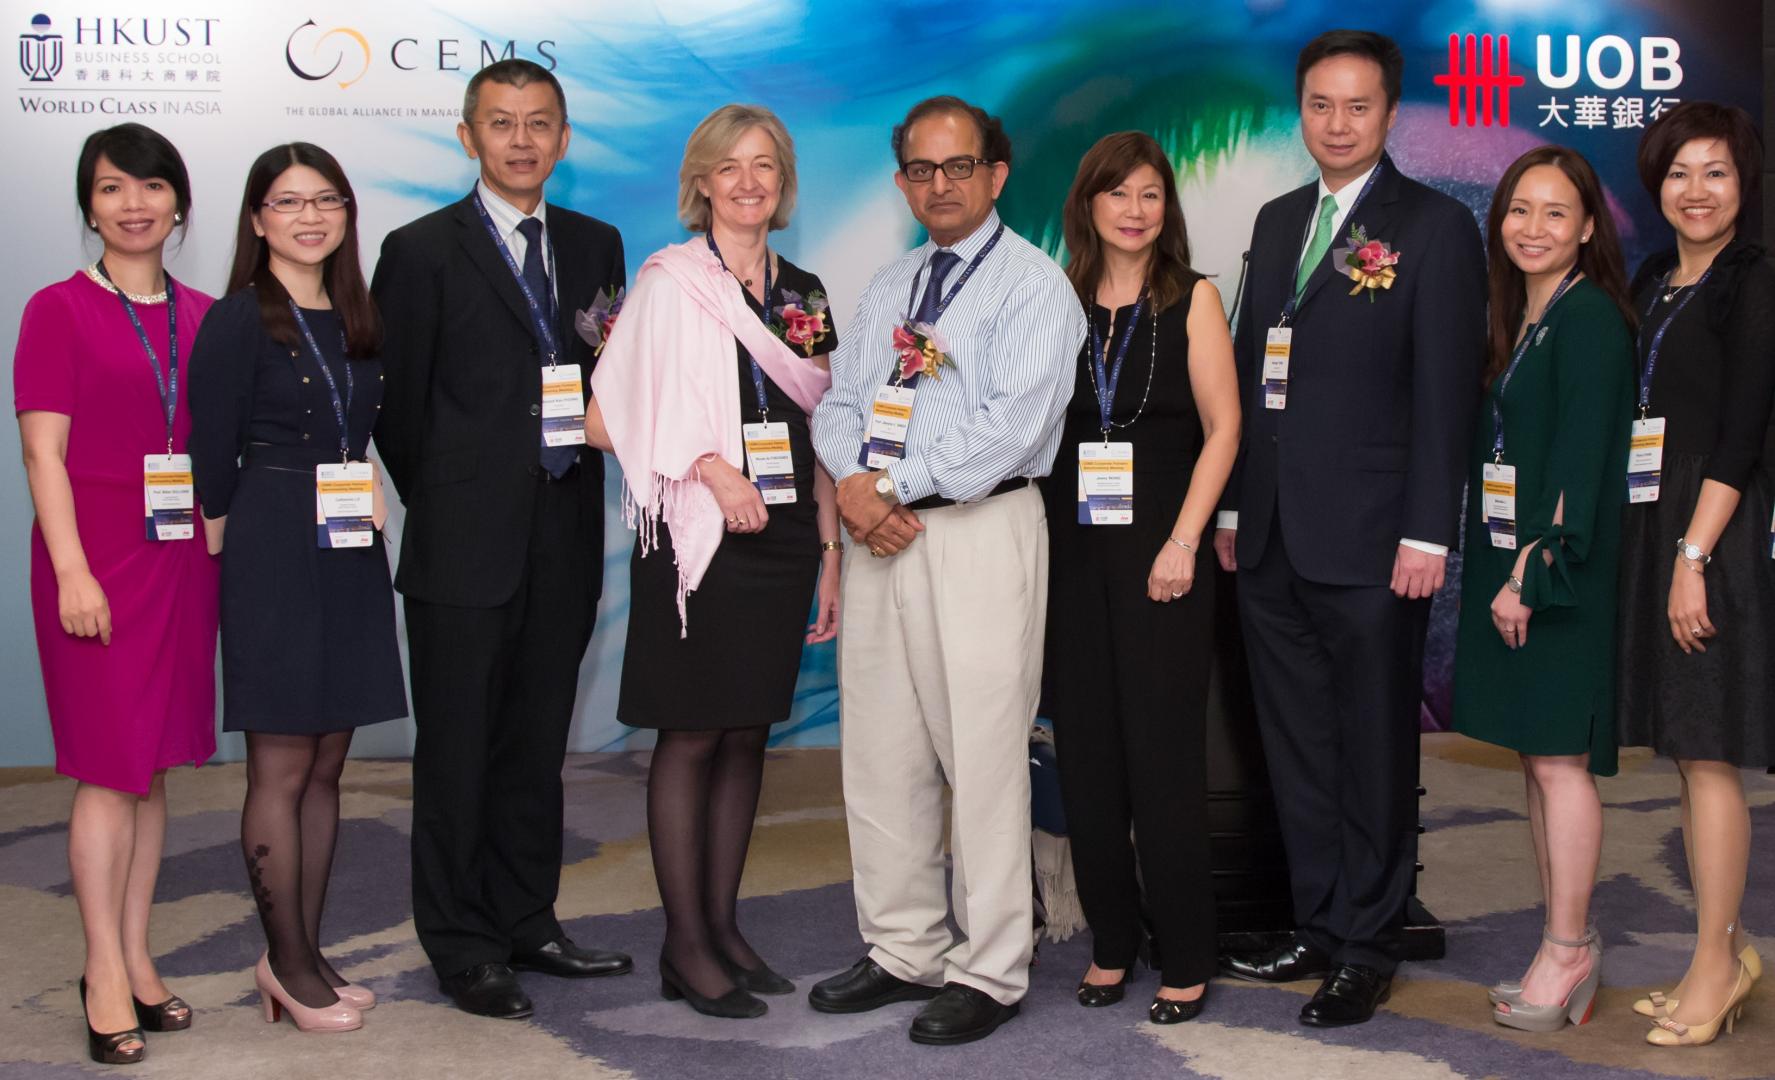  (Fourth from left) Ms Nicole de Fontaines, CEMS Secretary-General; Professor Jitendra V. Singh, Dean of the HKUST Business School and Michael Jebsen Professor of Business; Ms Jenny Wong, Managing Director and Head of Group Human Resources, UOB Singapore; and Mr George Tung, Alternate Chief Executive Director, UOB Hong Kong.